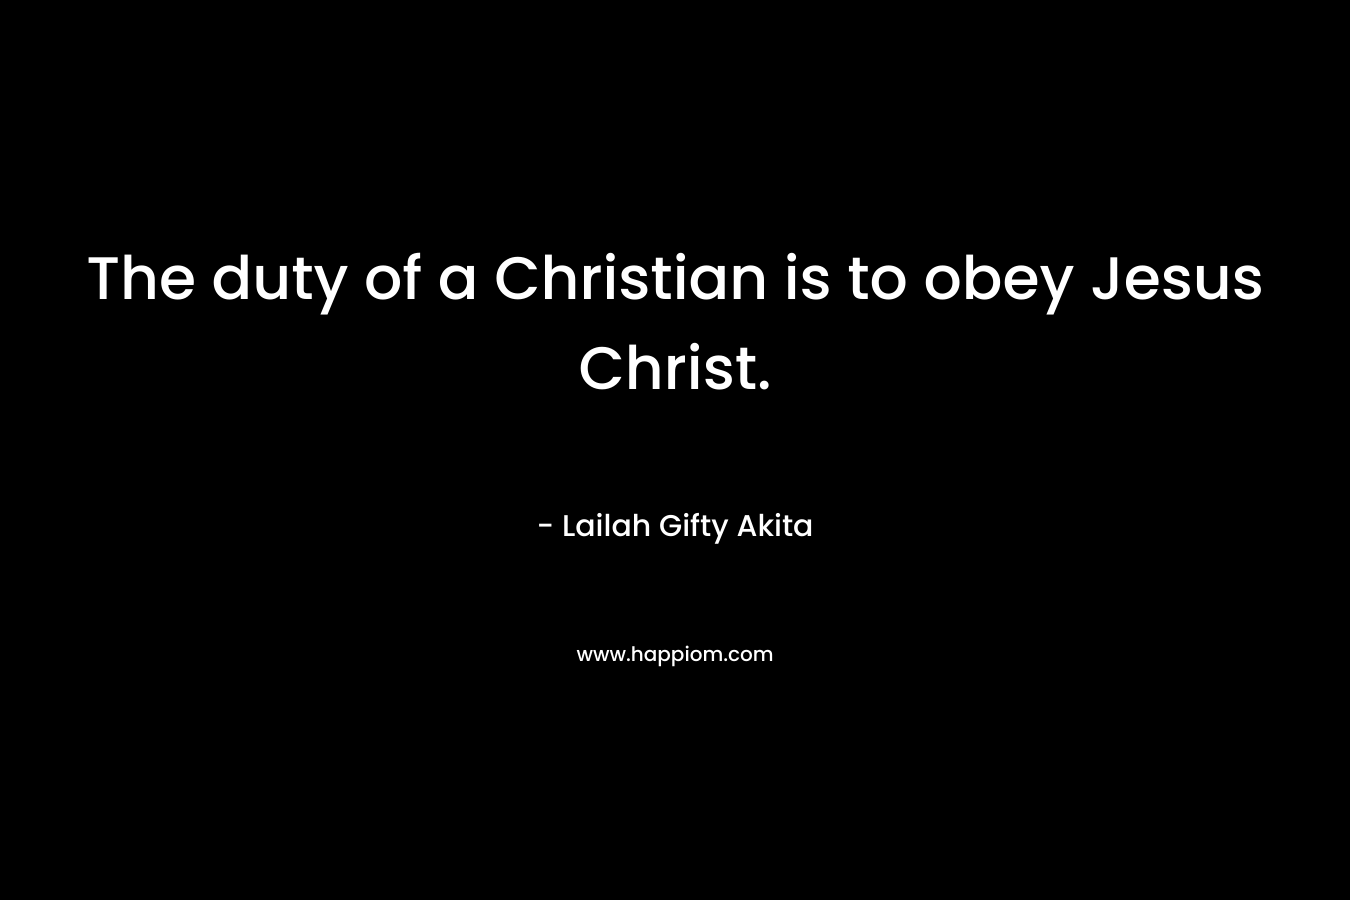 The duty of a Christian is to obey Jesus Christ.